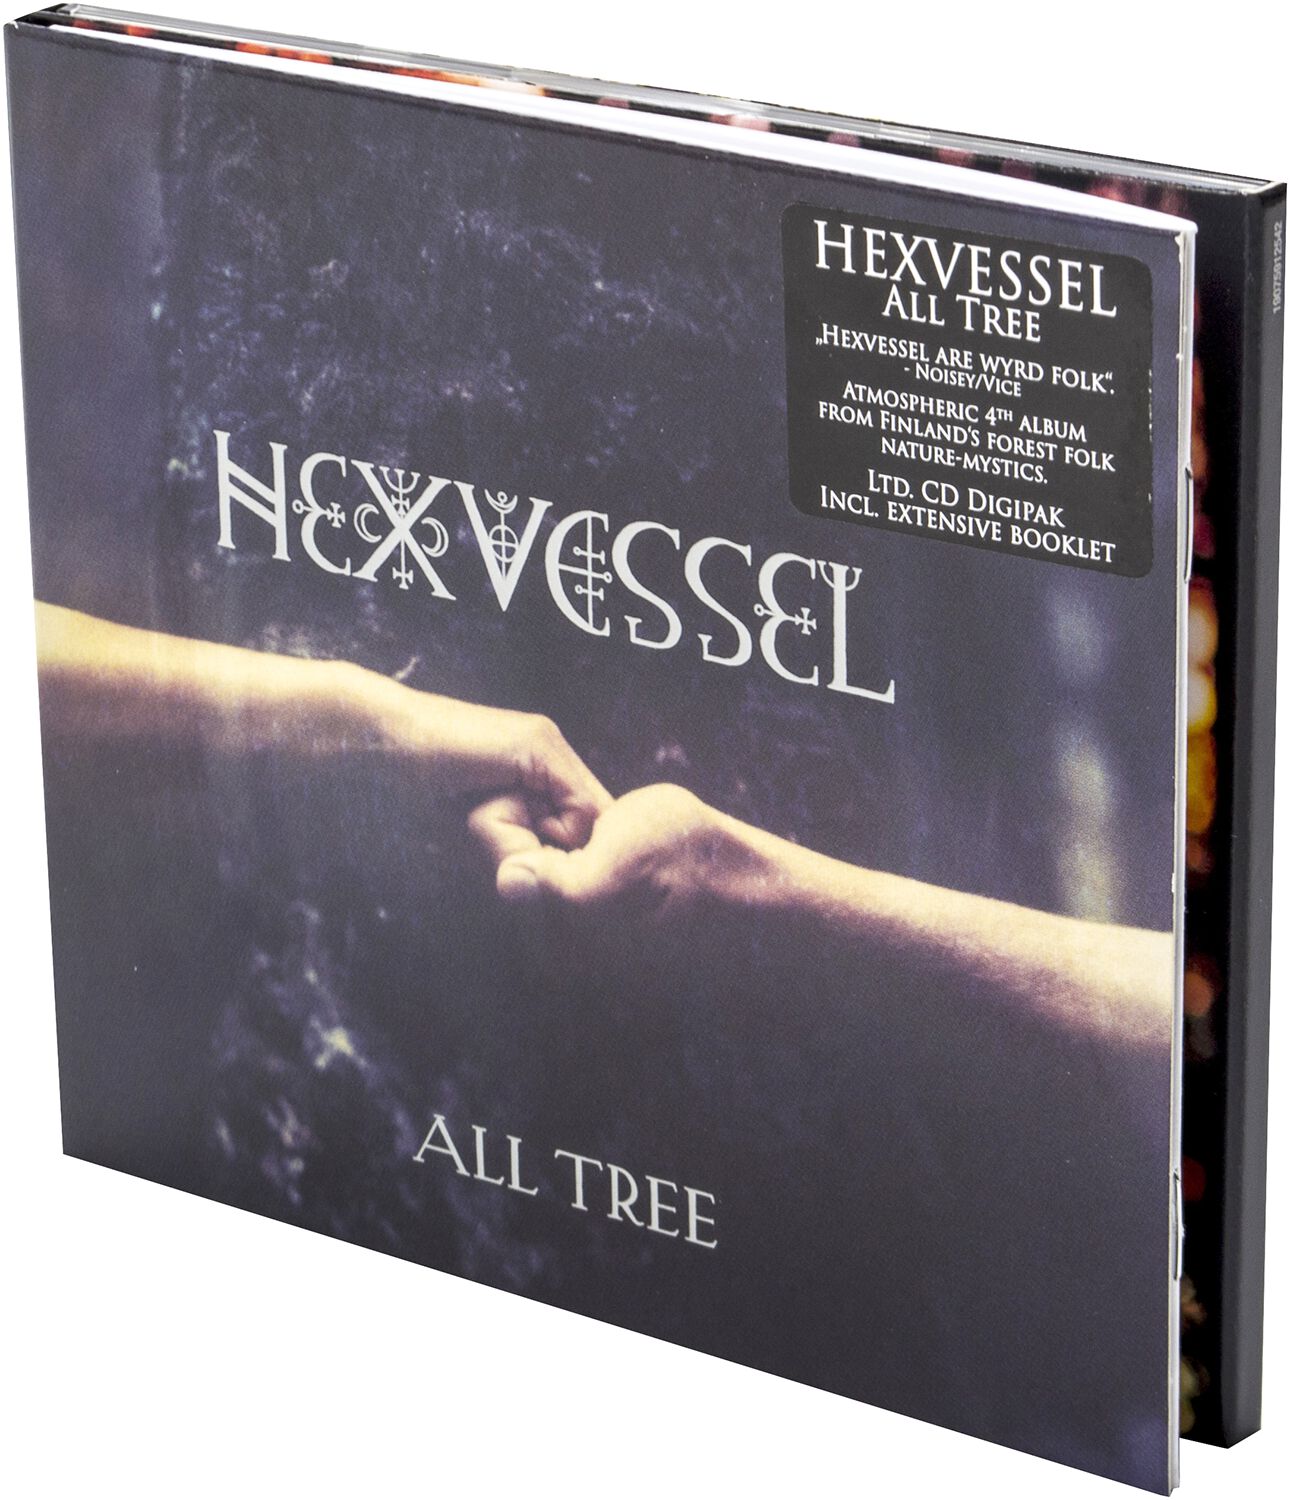 Image of Hexvessel All tree CD Standard